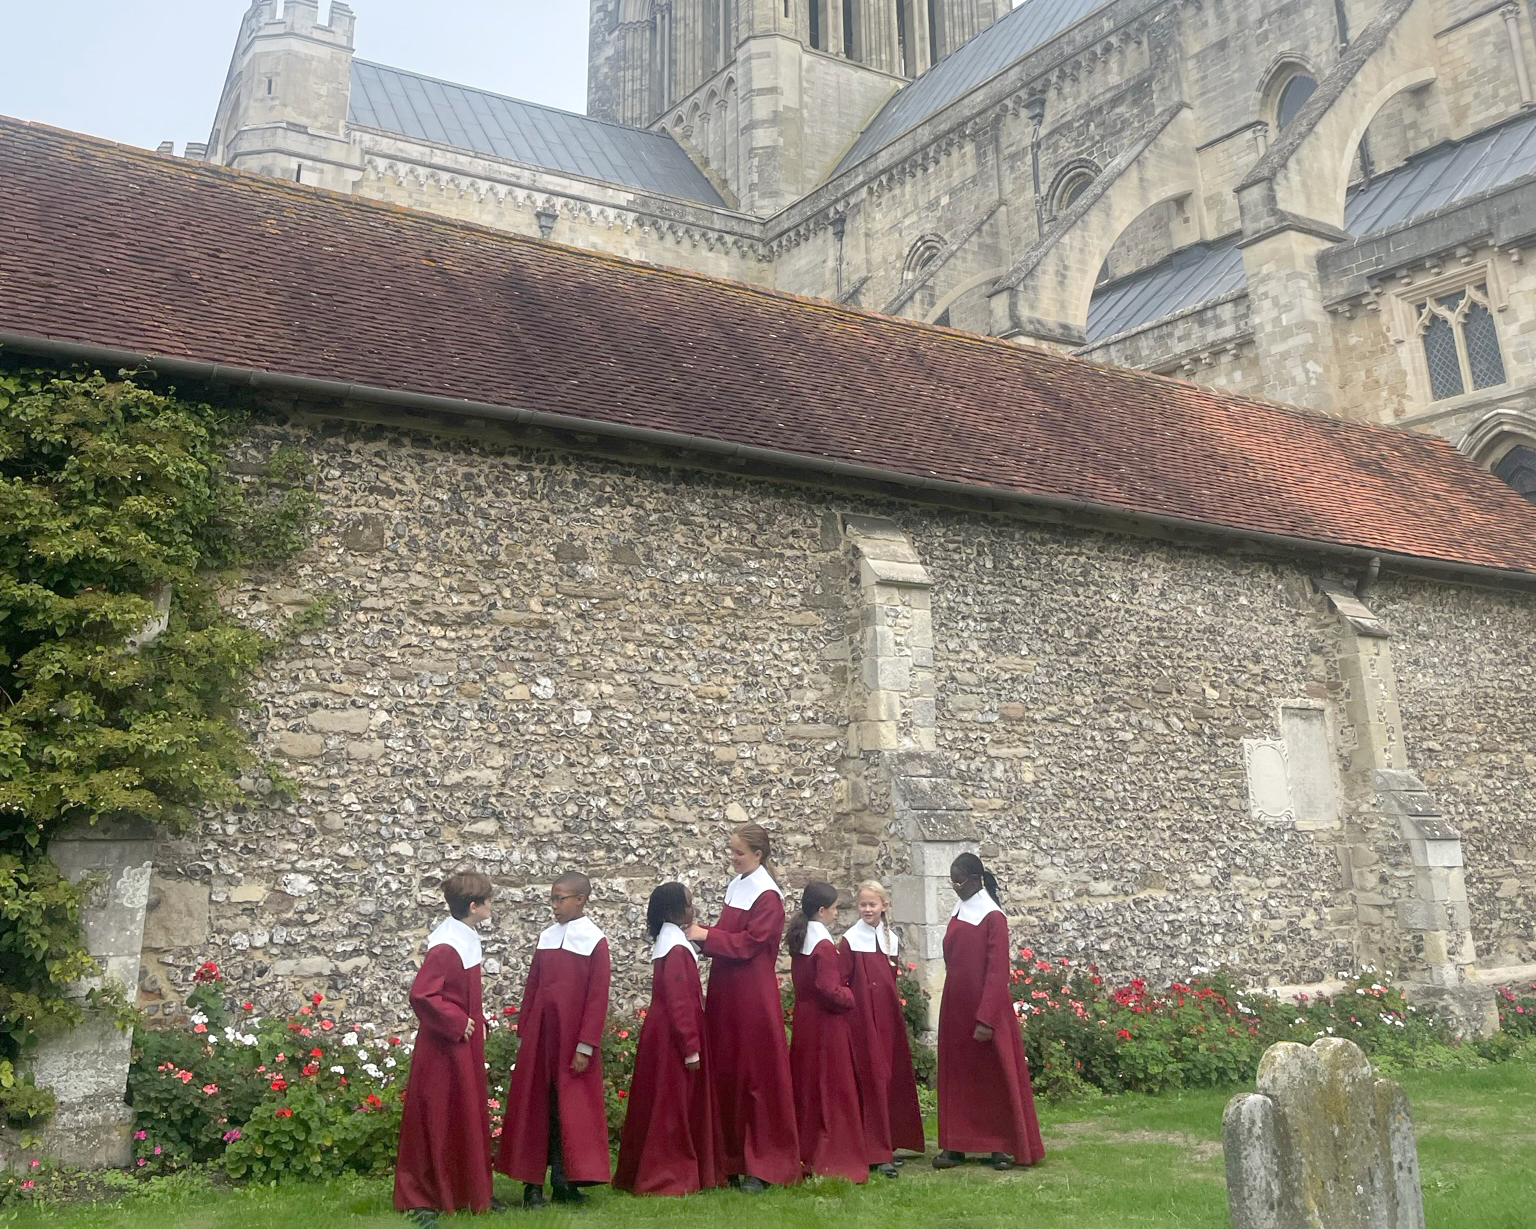 Chorister probationers in front of the cathedral